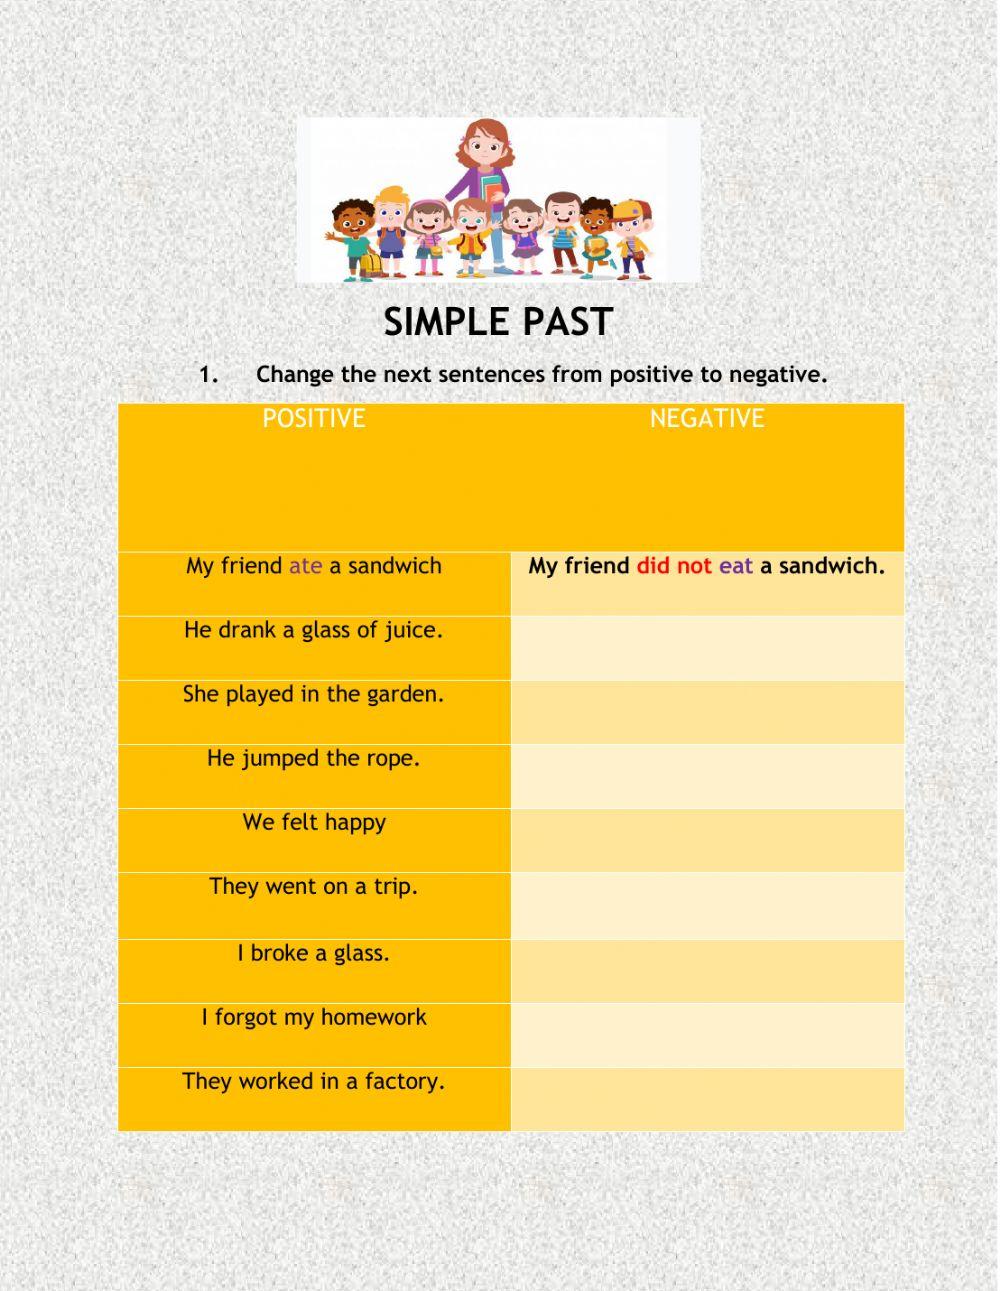 Simple past positive and negative